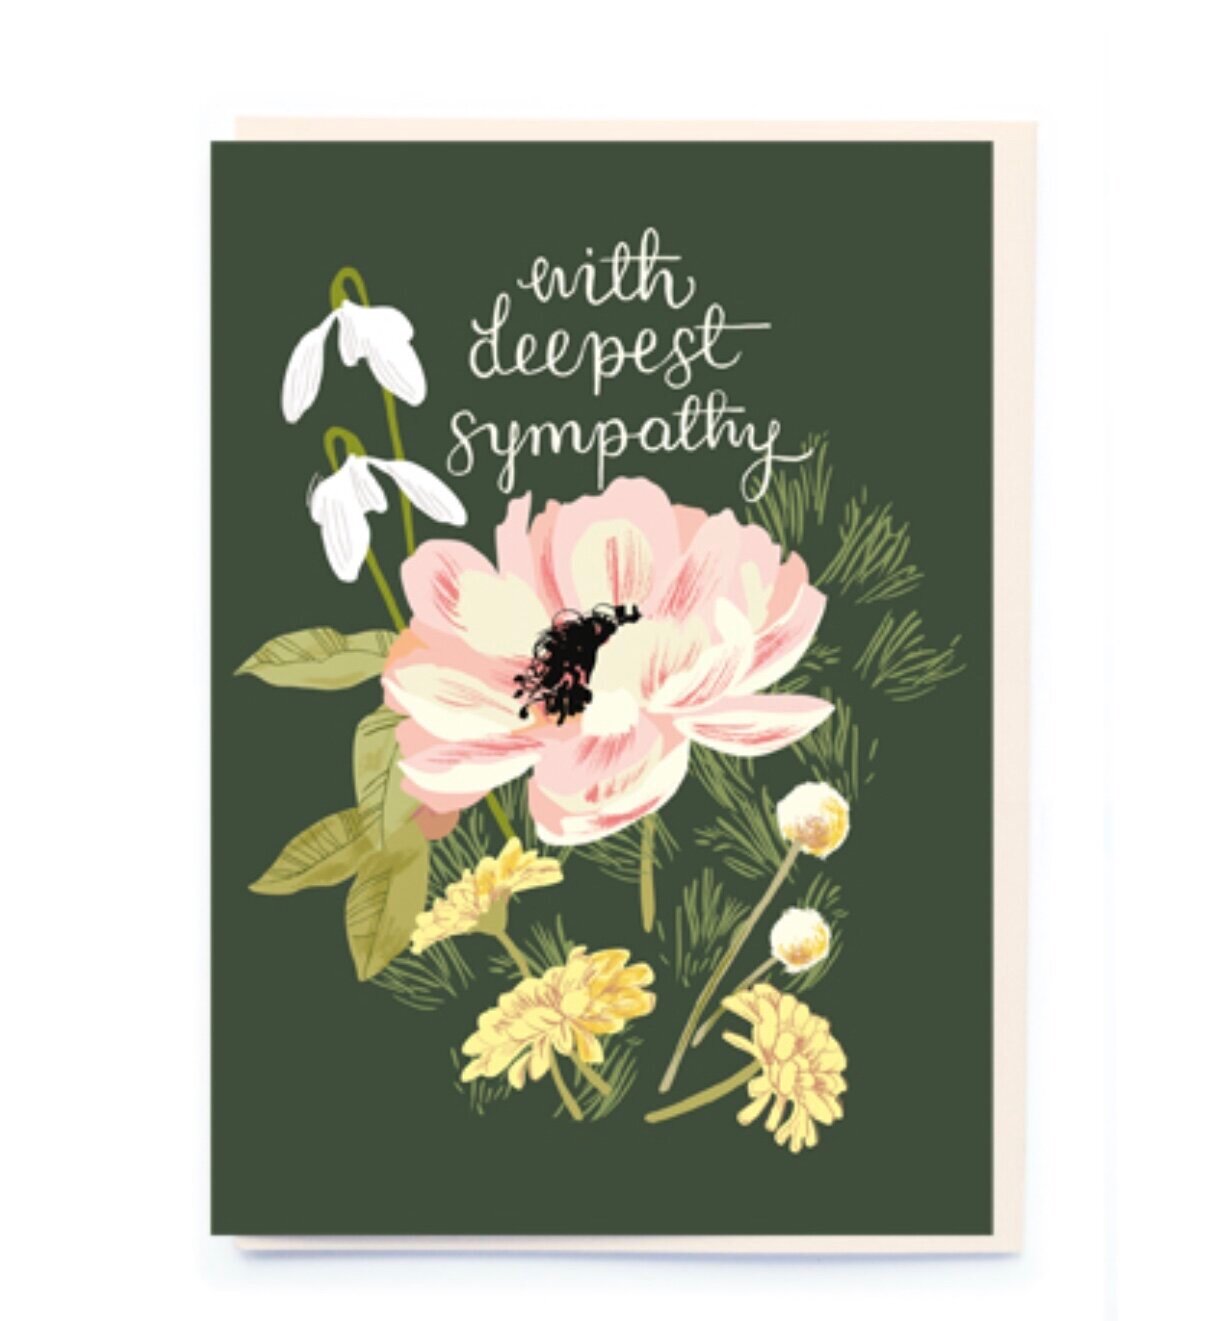 WITH DEEPEST SYMPATHY | CARD BY NOI